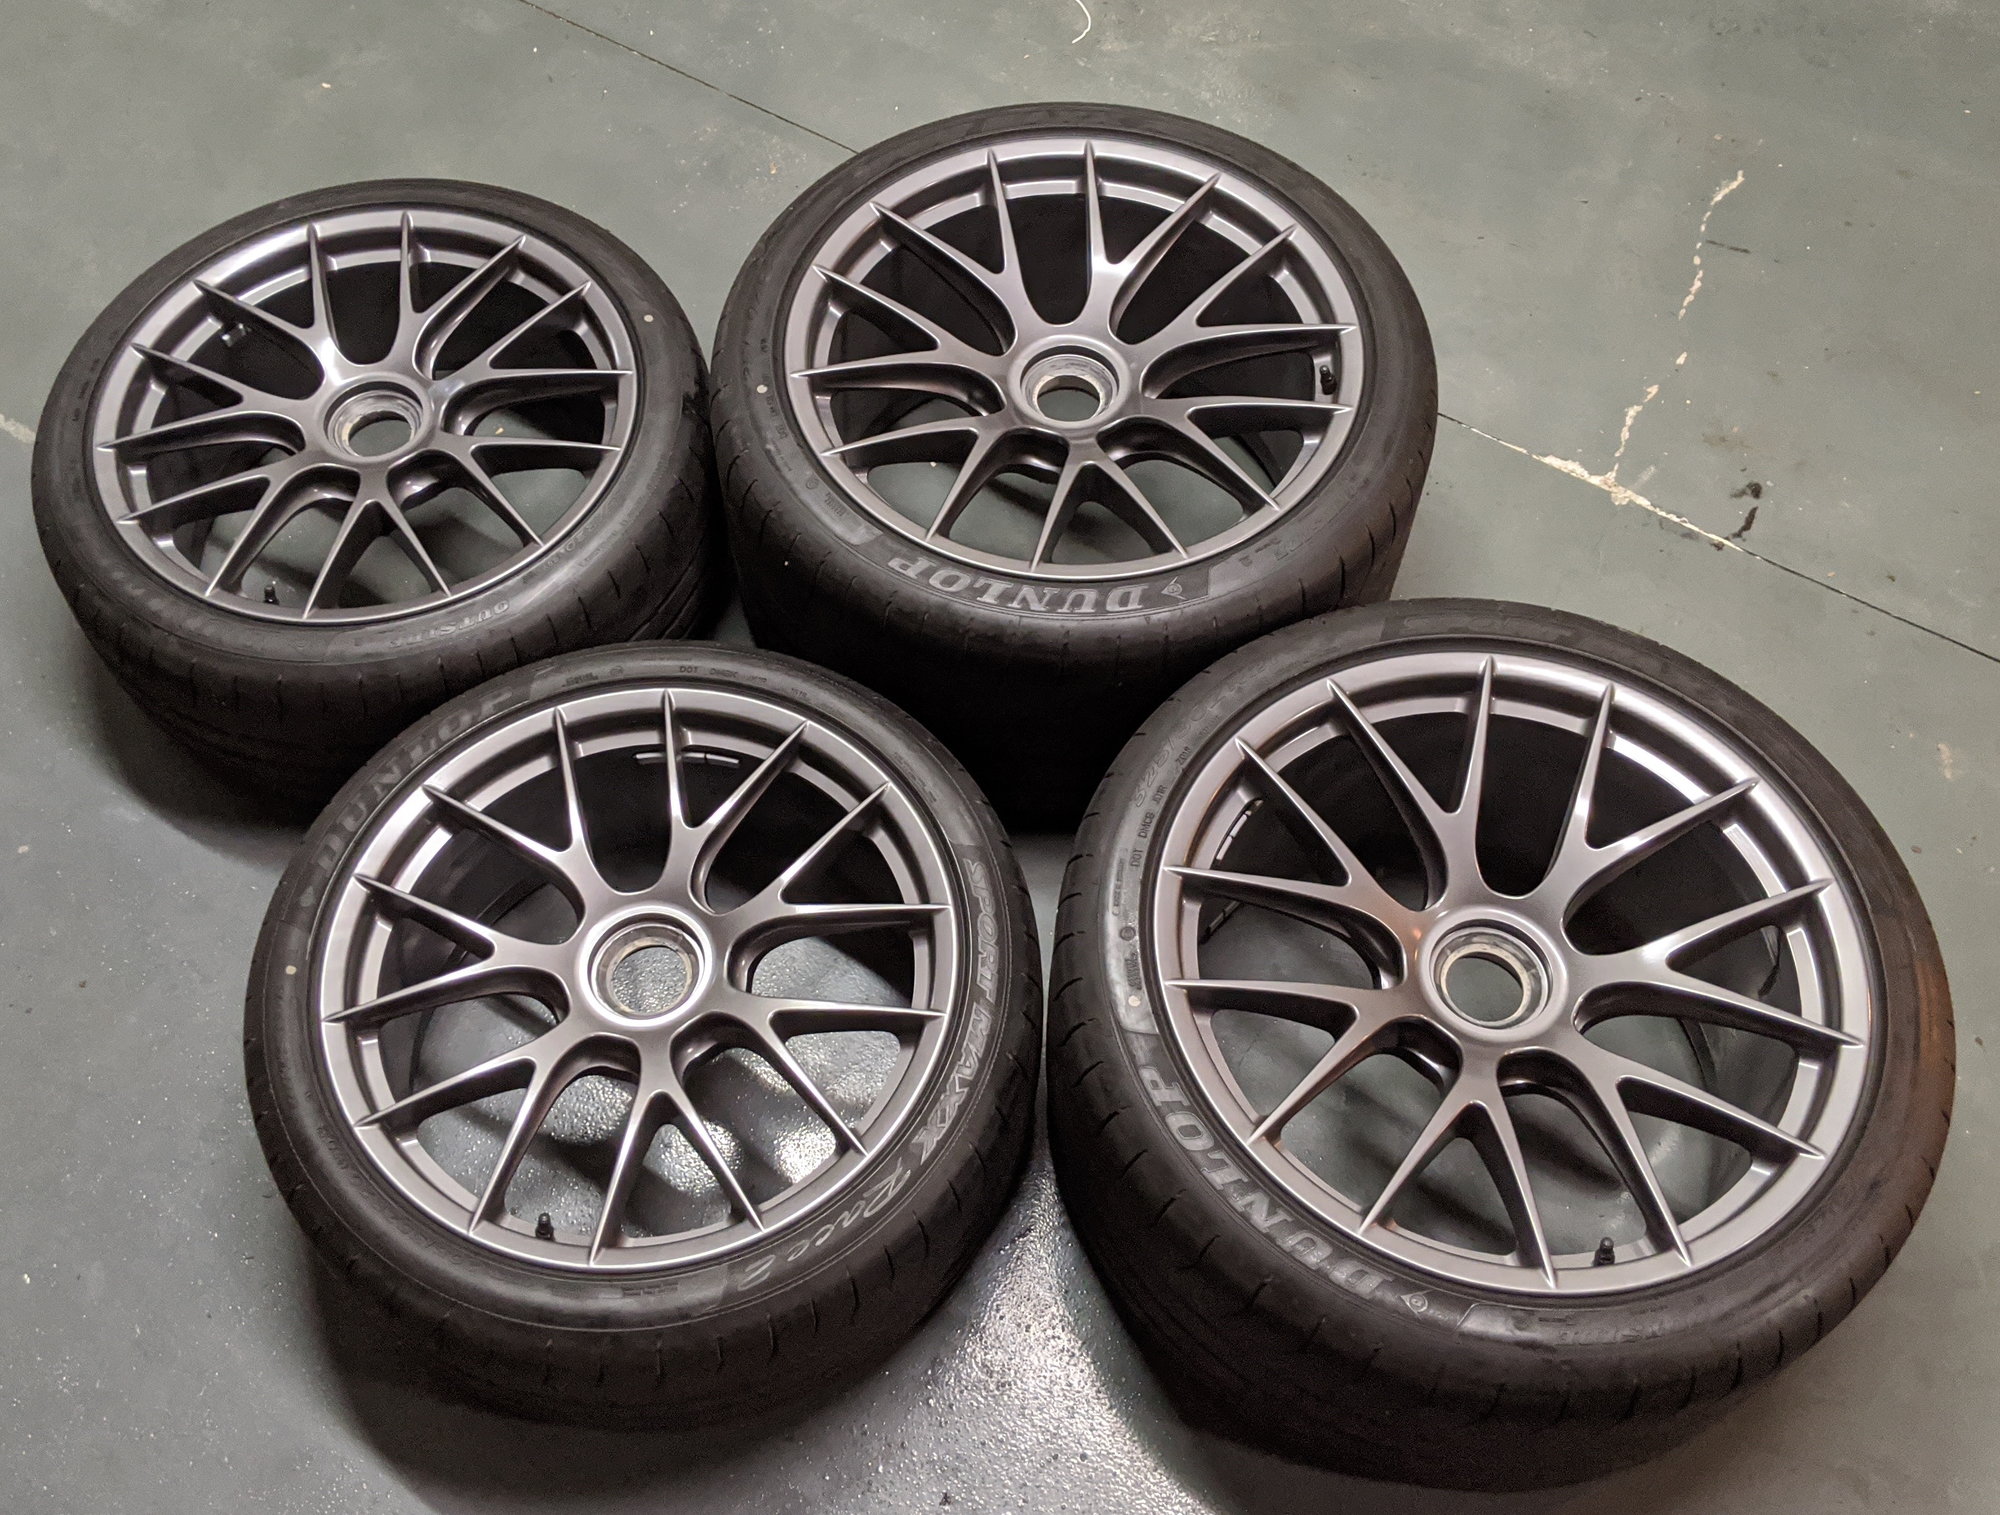 Wheels and Tires/Axles - BBS Magnesium Weissach Package Wheelset WP 991 GT3RS GT2RS - Used - 2018 to 2019 Porsche GT2 - 2016 to 2019 Porsche GT3 - 2014 to 2015 Porsche 918 Spyder - Boston, MA 02215, United States